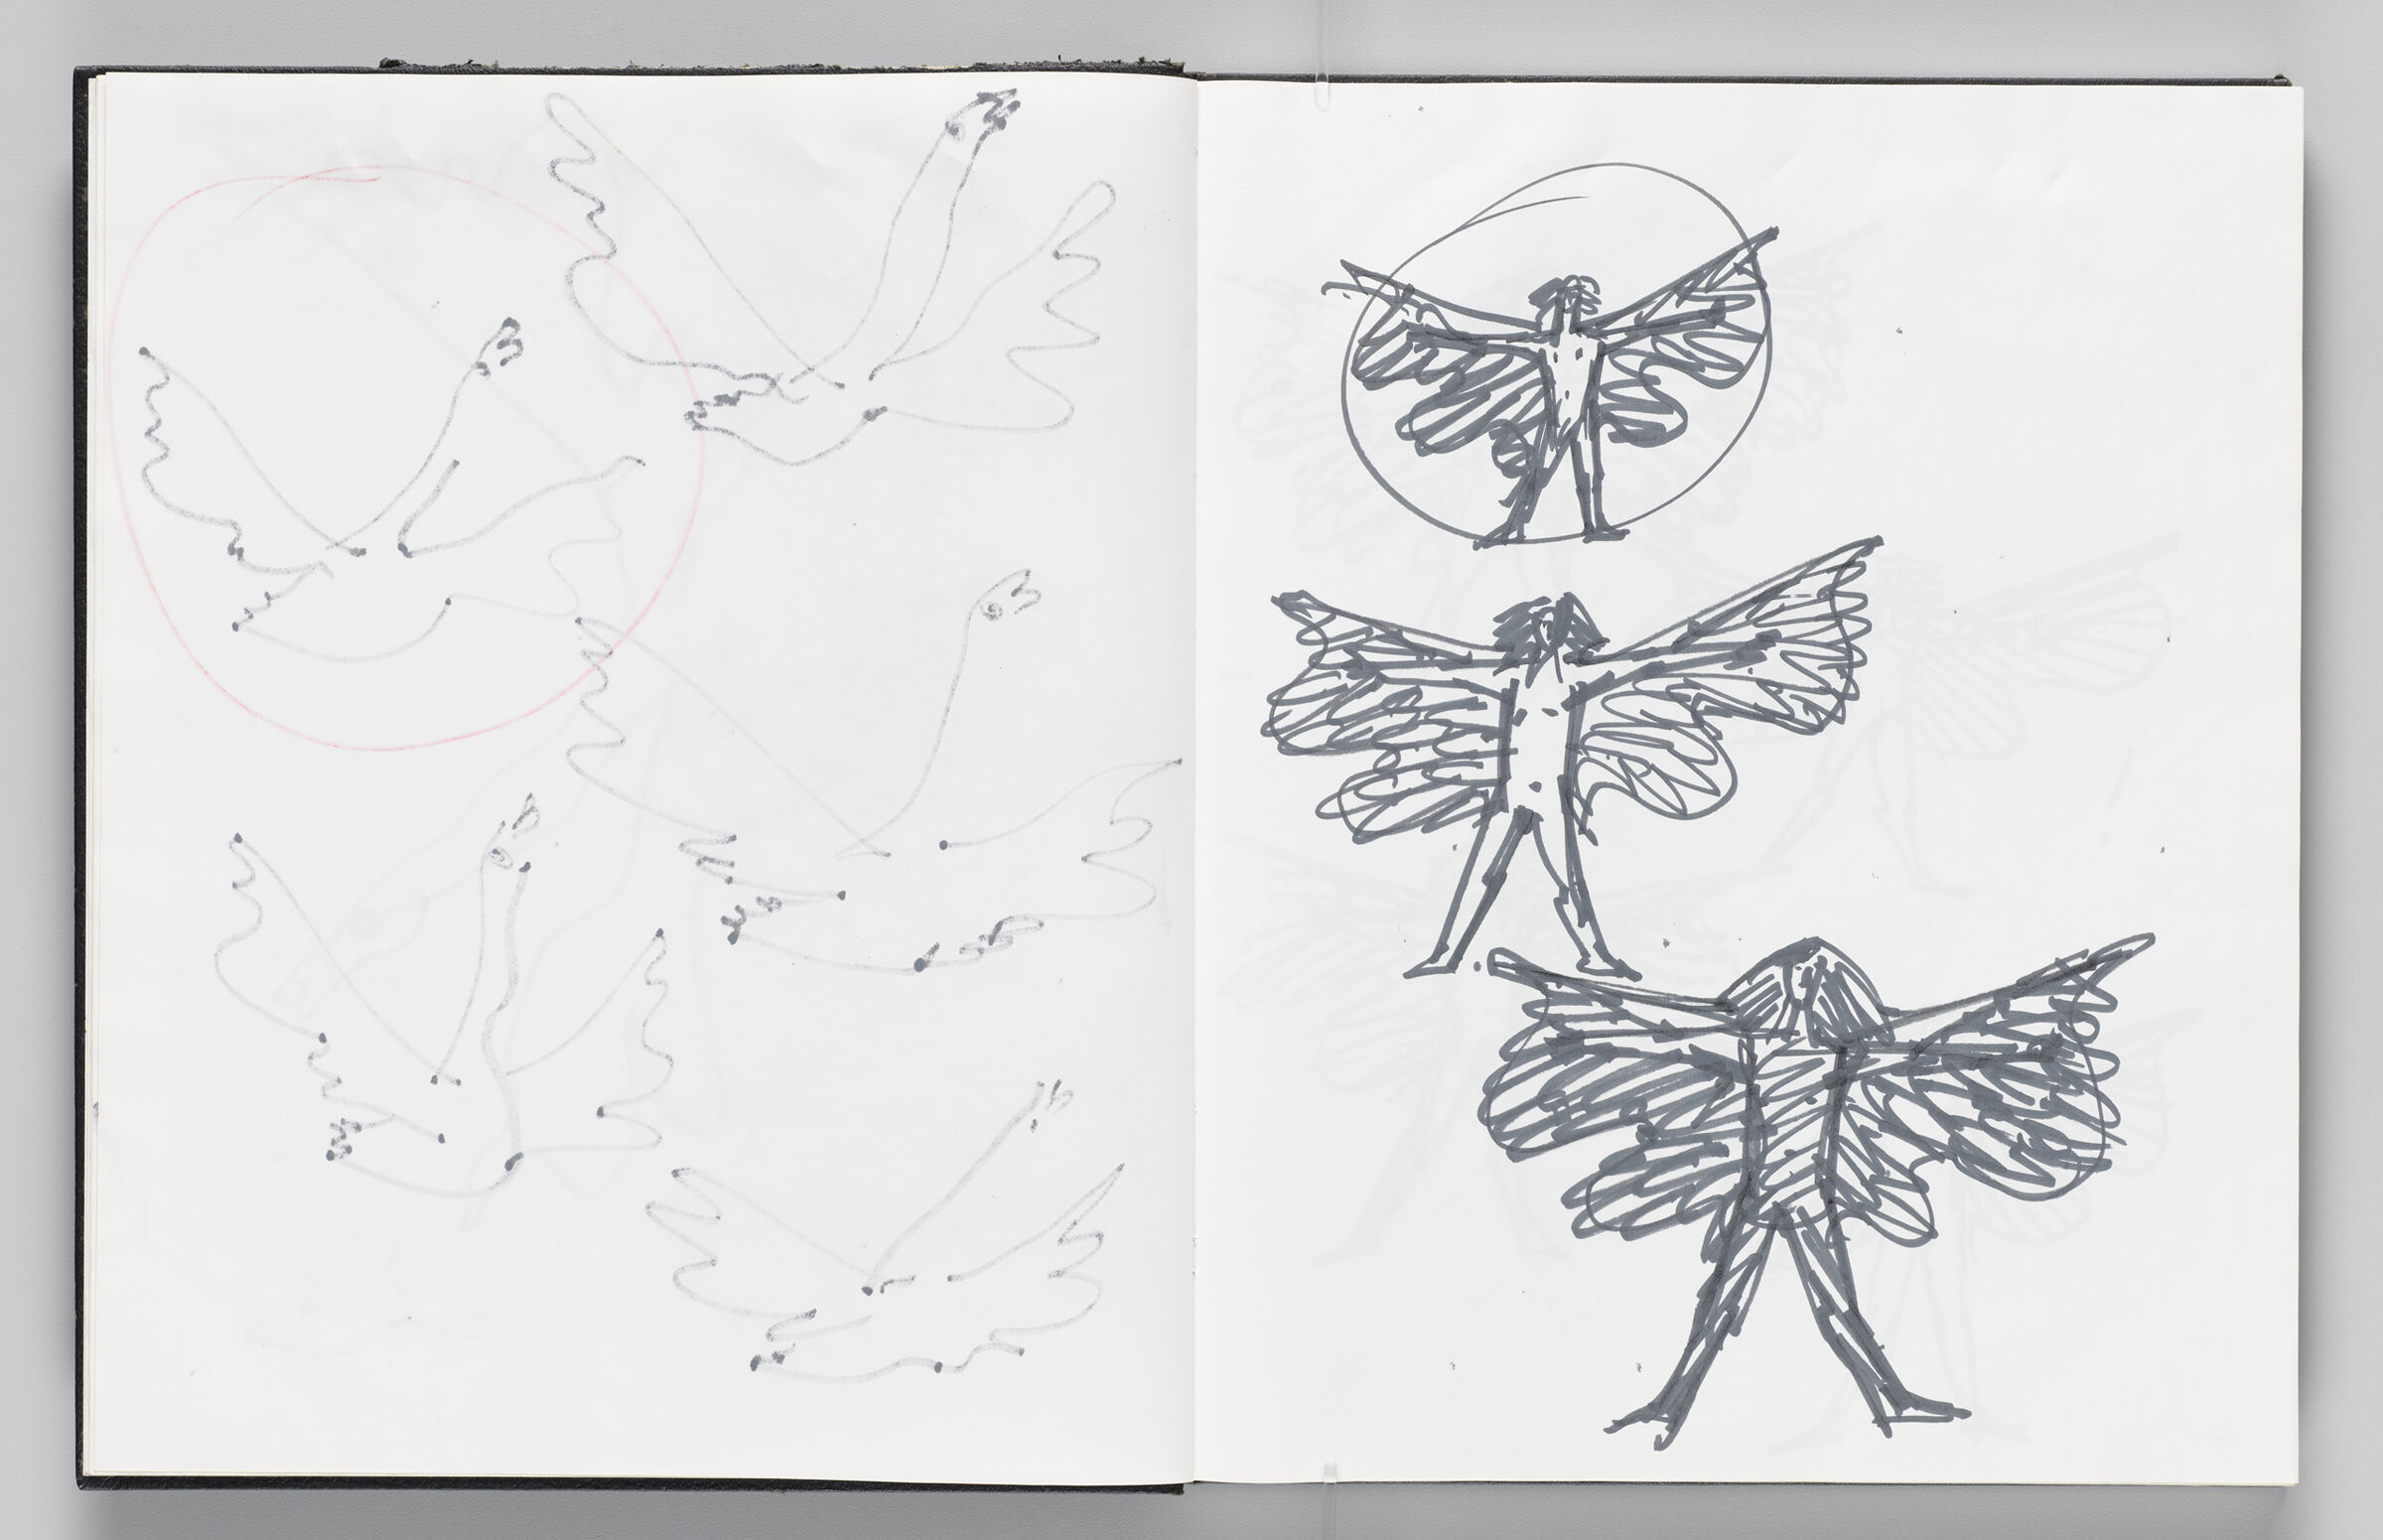 Untitled (Bleed-Through Of Previous Page, Left Page); Untitled (Icarus Sketches, Right Page)